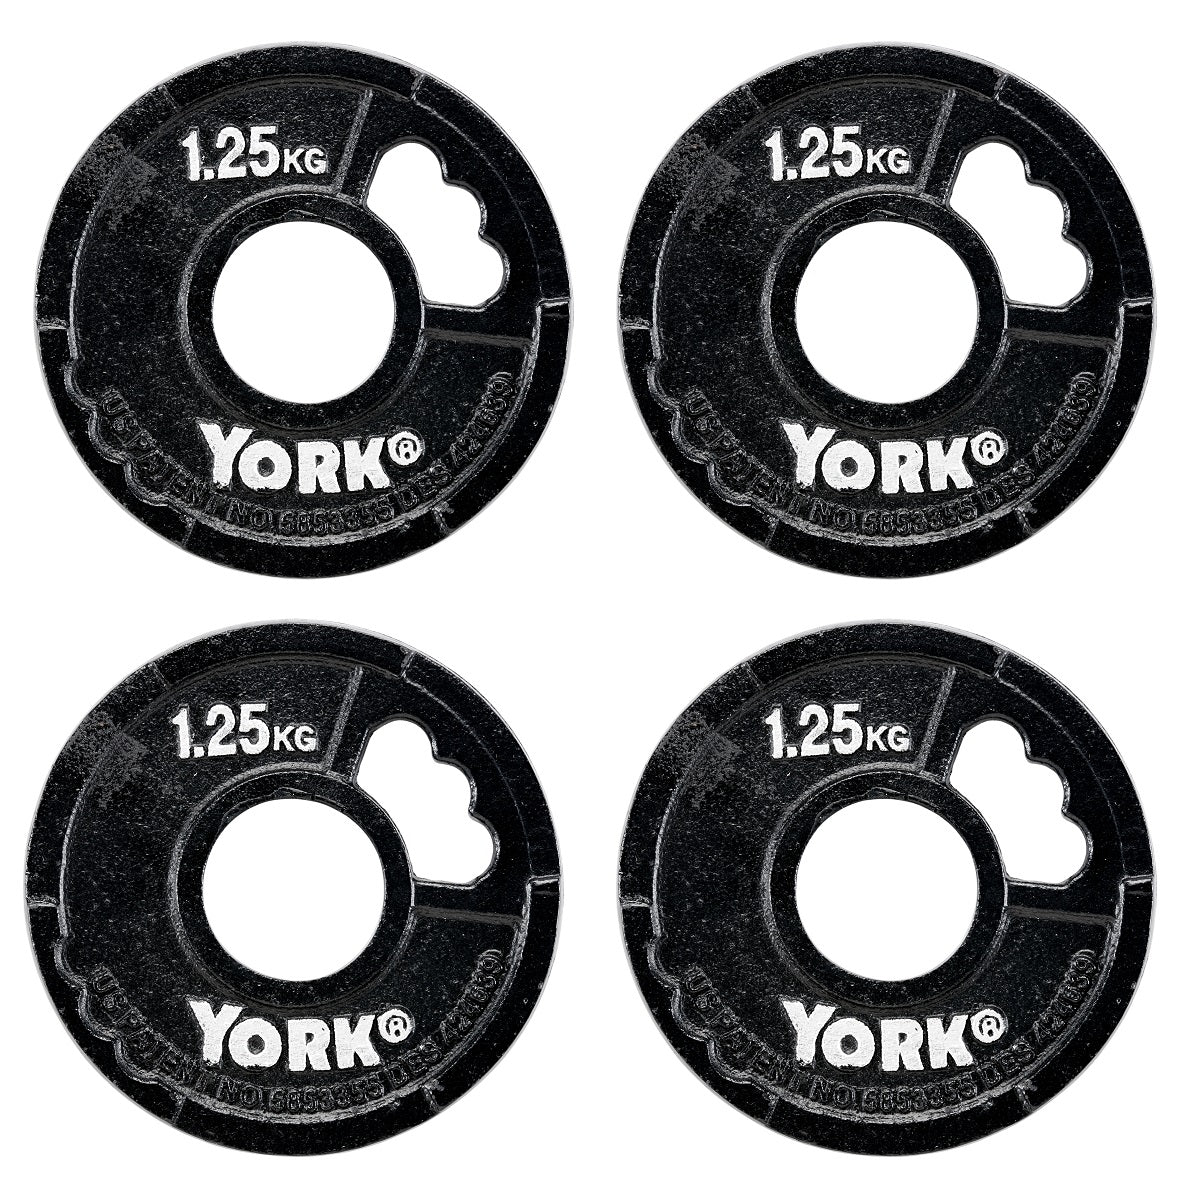 York Barbell G2 Cast Iron Olympic Weight Plates, York Fitness